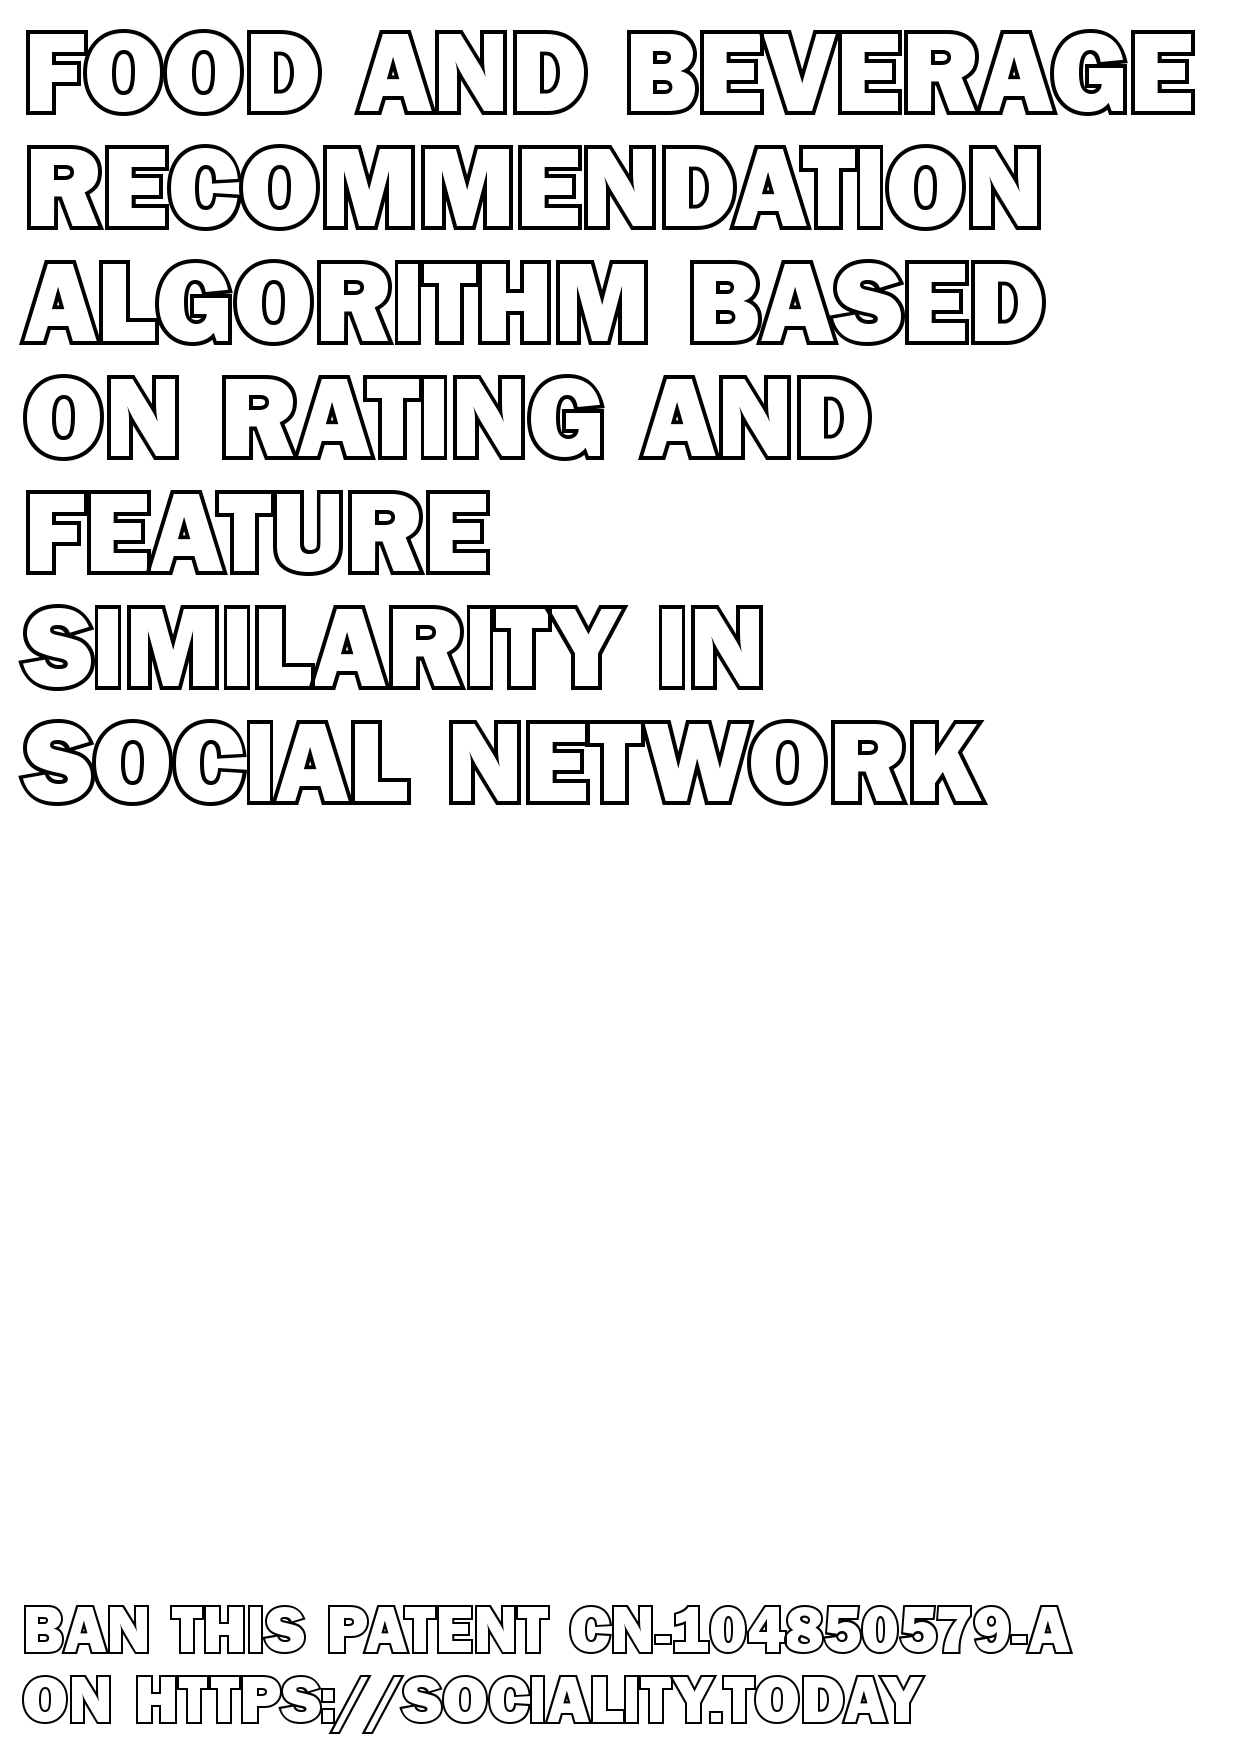 Food and beverage recommendation algorithm based on rating and feature similarity in social network  - CN-104850579-A